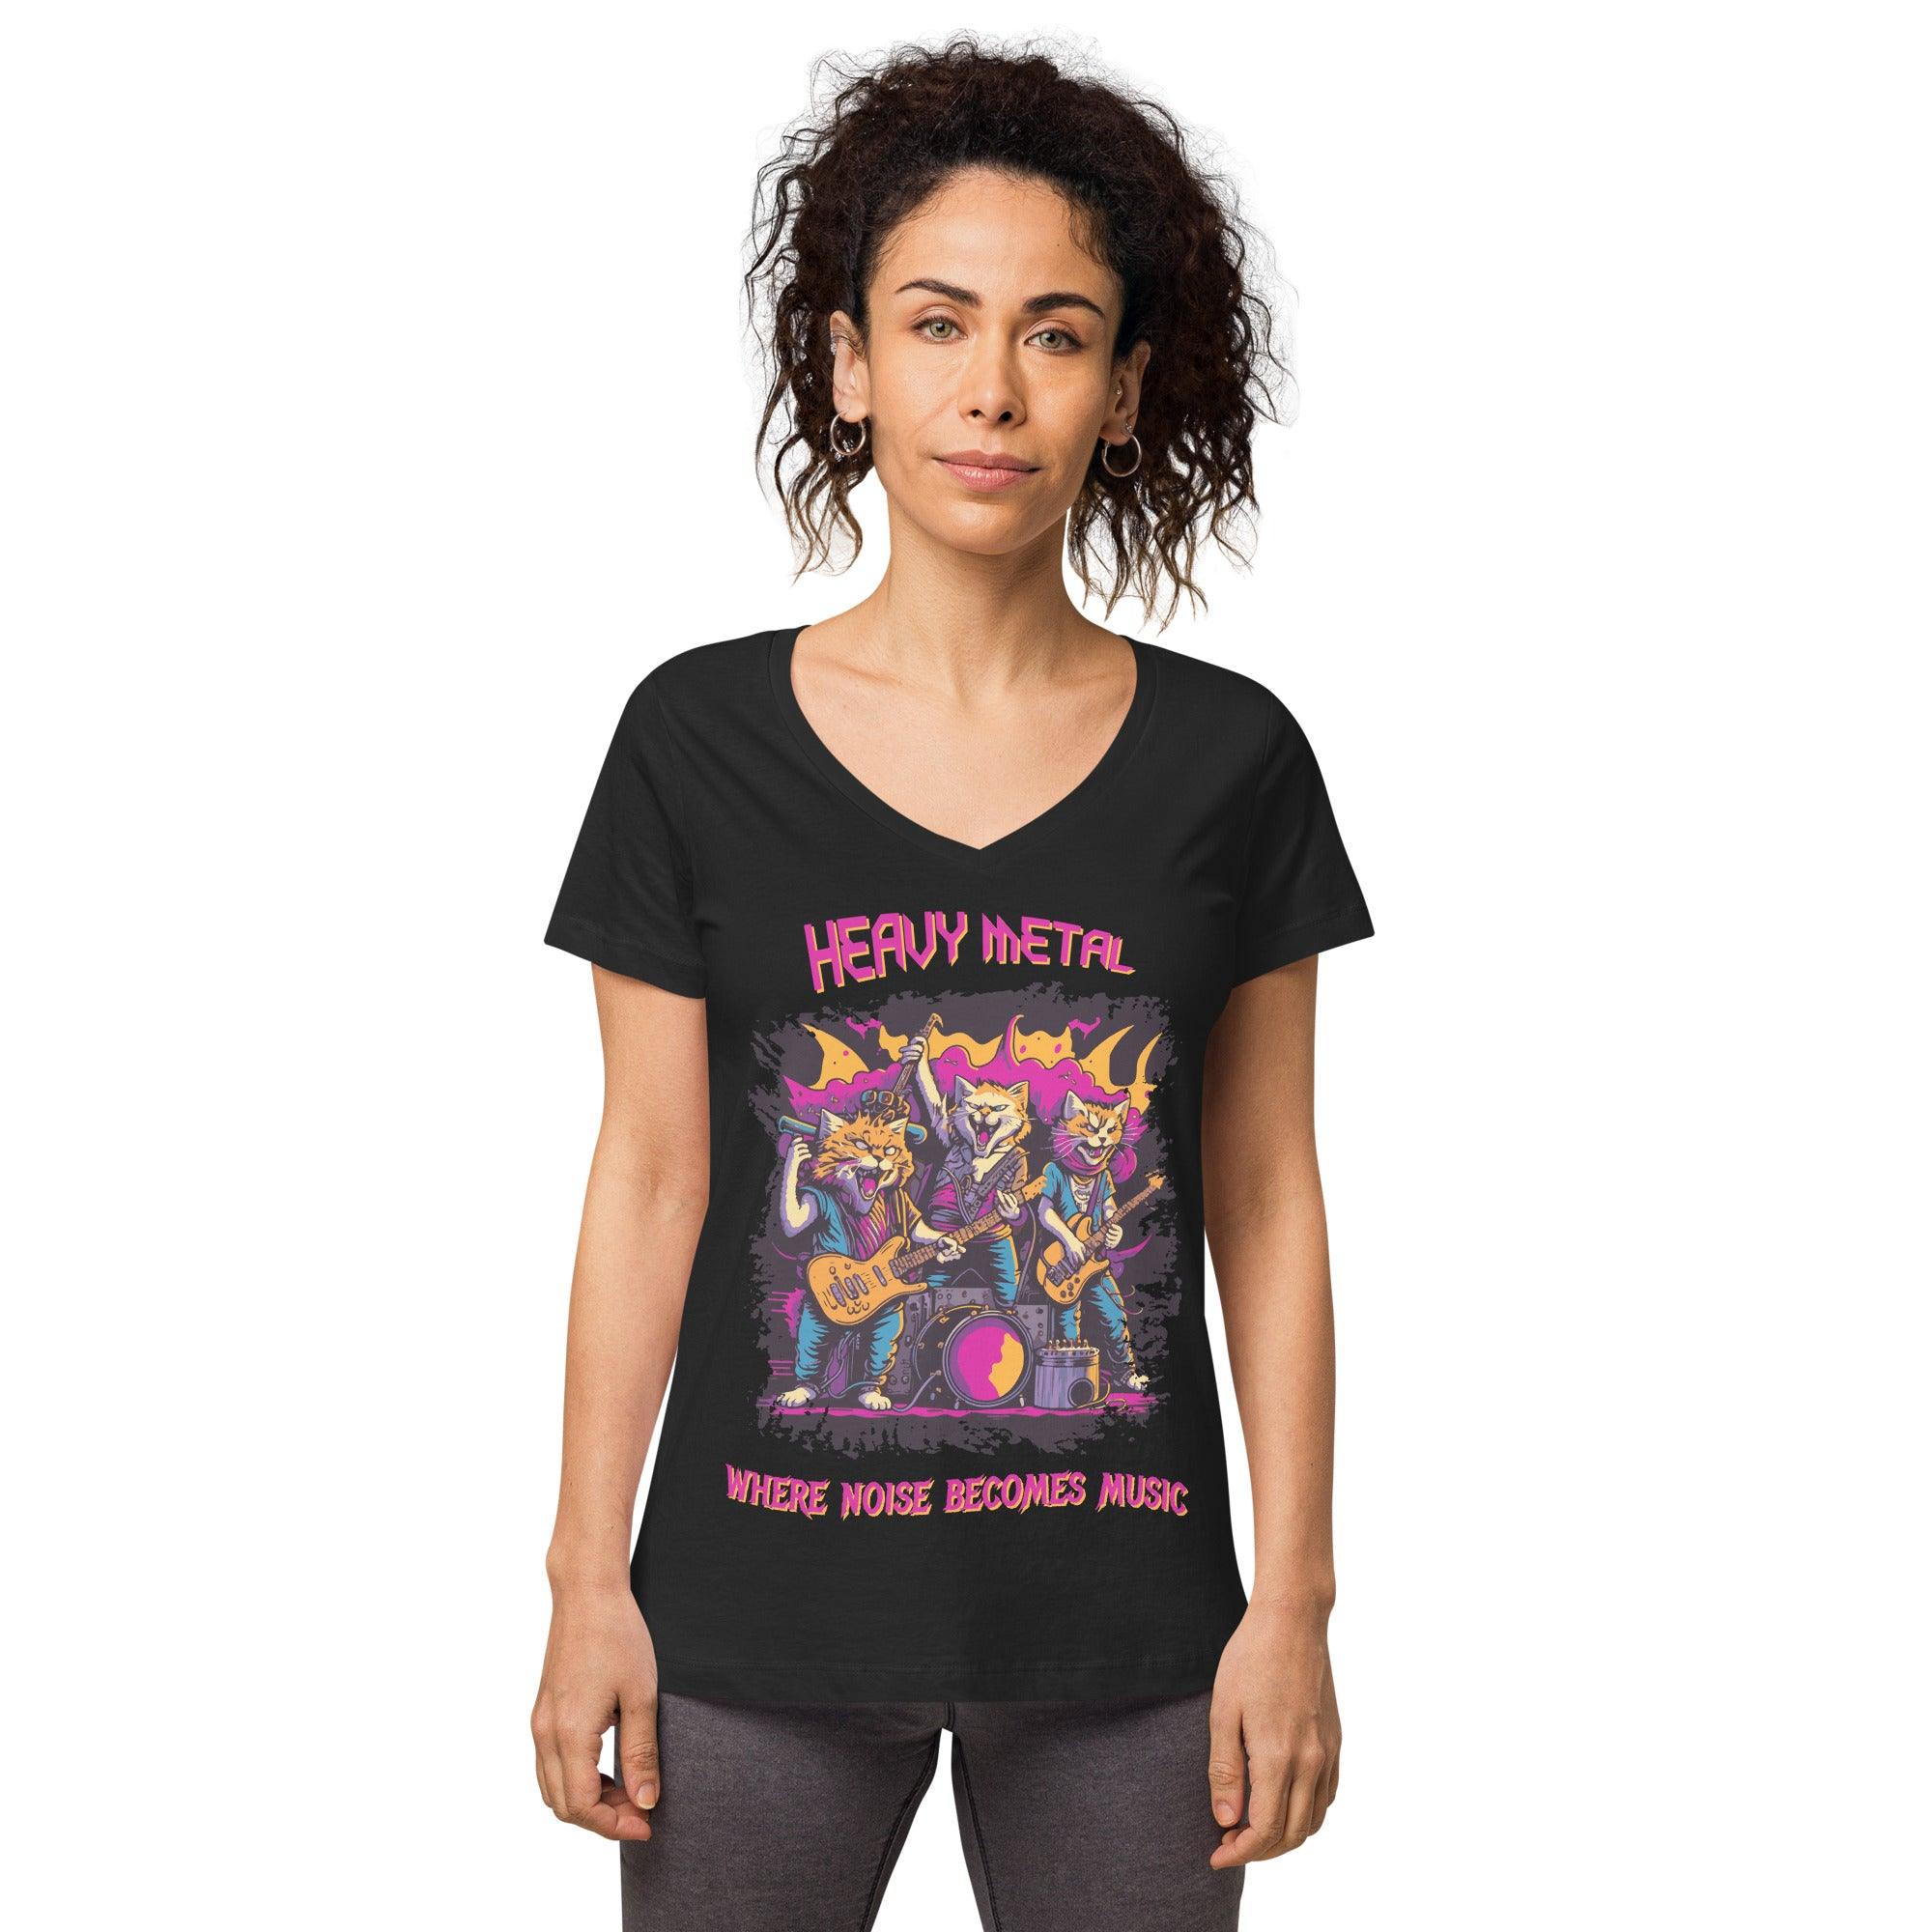 Heavy metal women’s fitted v-neck t-shirt - Beyond T-shirts